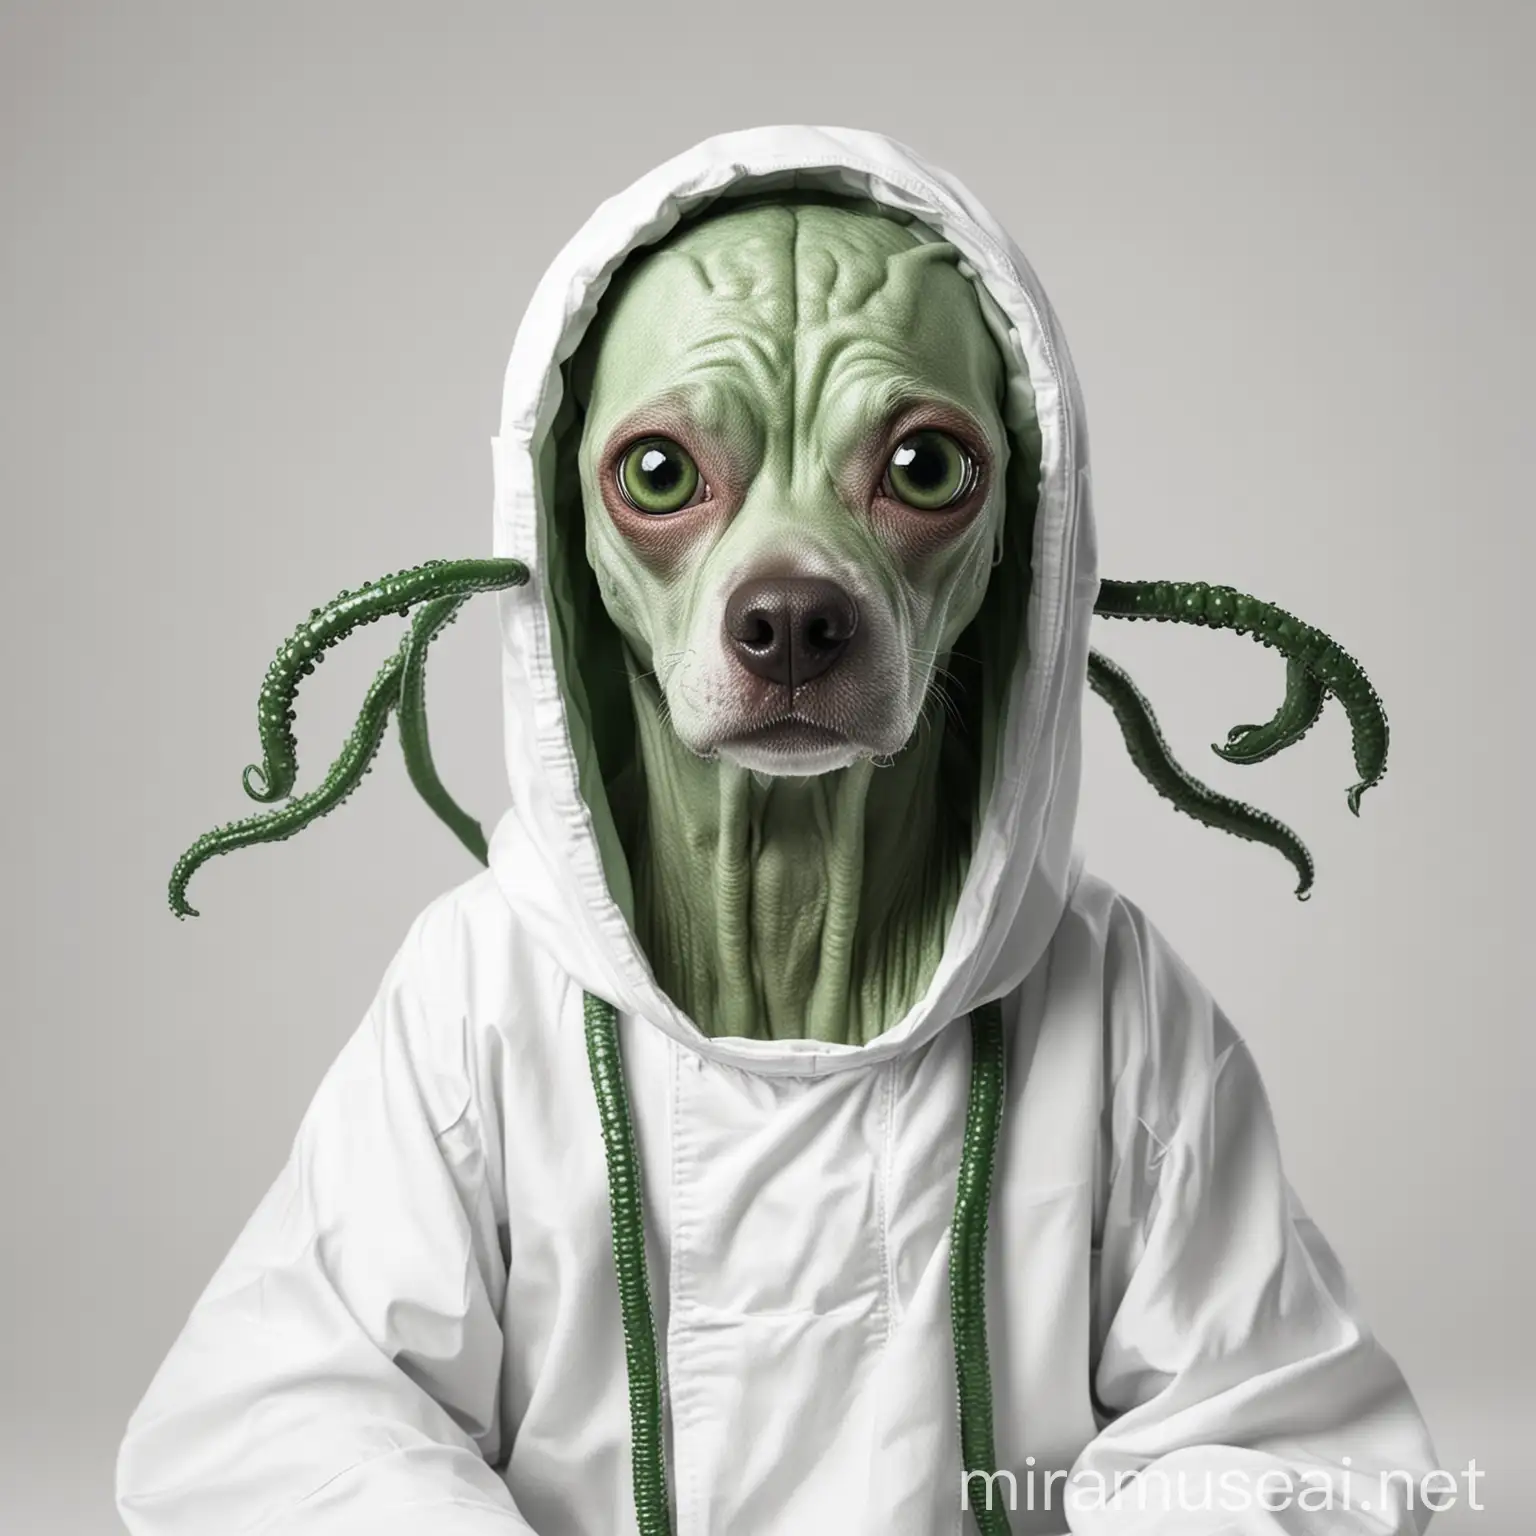 Generate an alien who looks like a dog. He should have 3 eyes, green tentacles. He should be in a surgeon's robe. He should be sitting in a flying saucer. Photo should be on white background